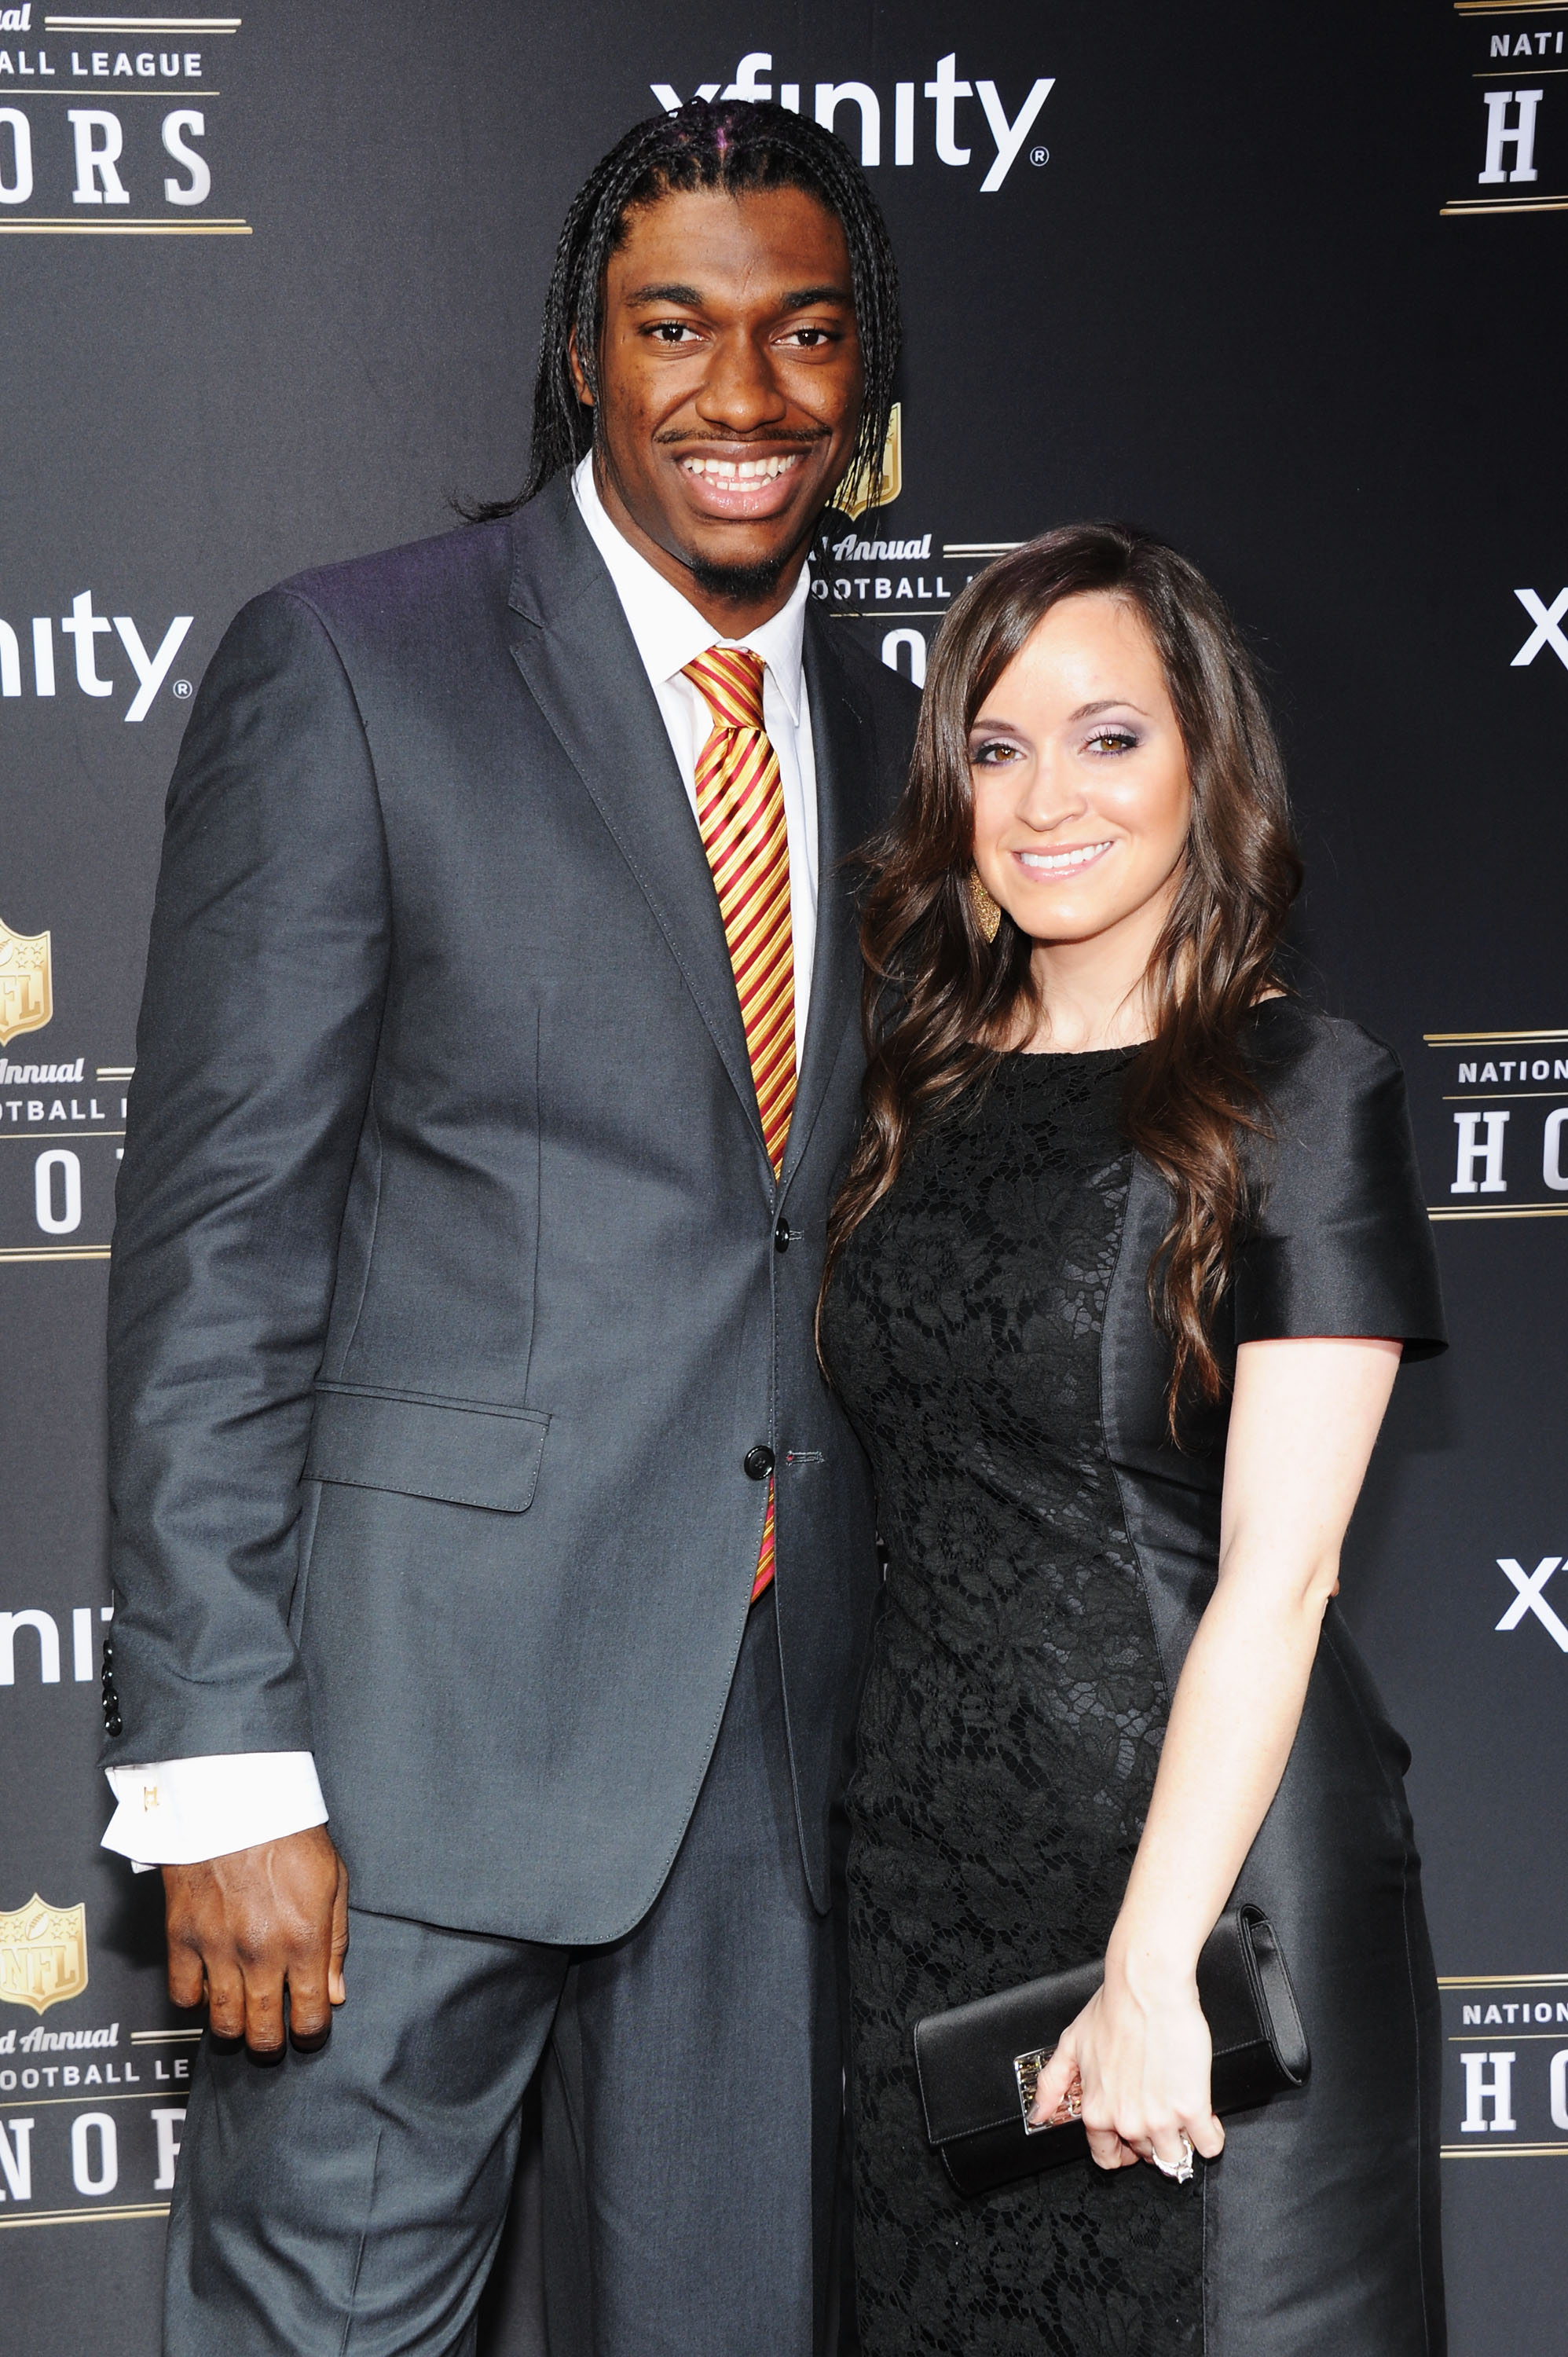 Robert Griffin III and Rebecca Liddicoat at the 2nd Annual NFL Honors on February 2, 2013, in New Orleans, Louisiana. | Source: Getty Images